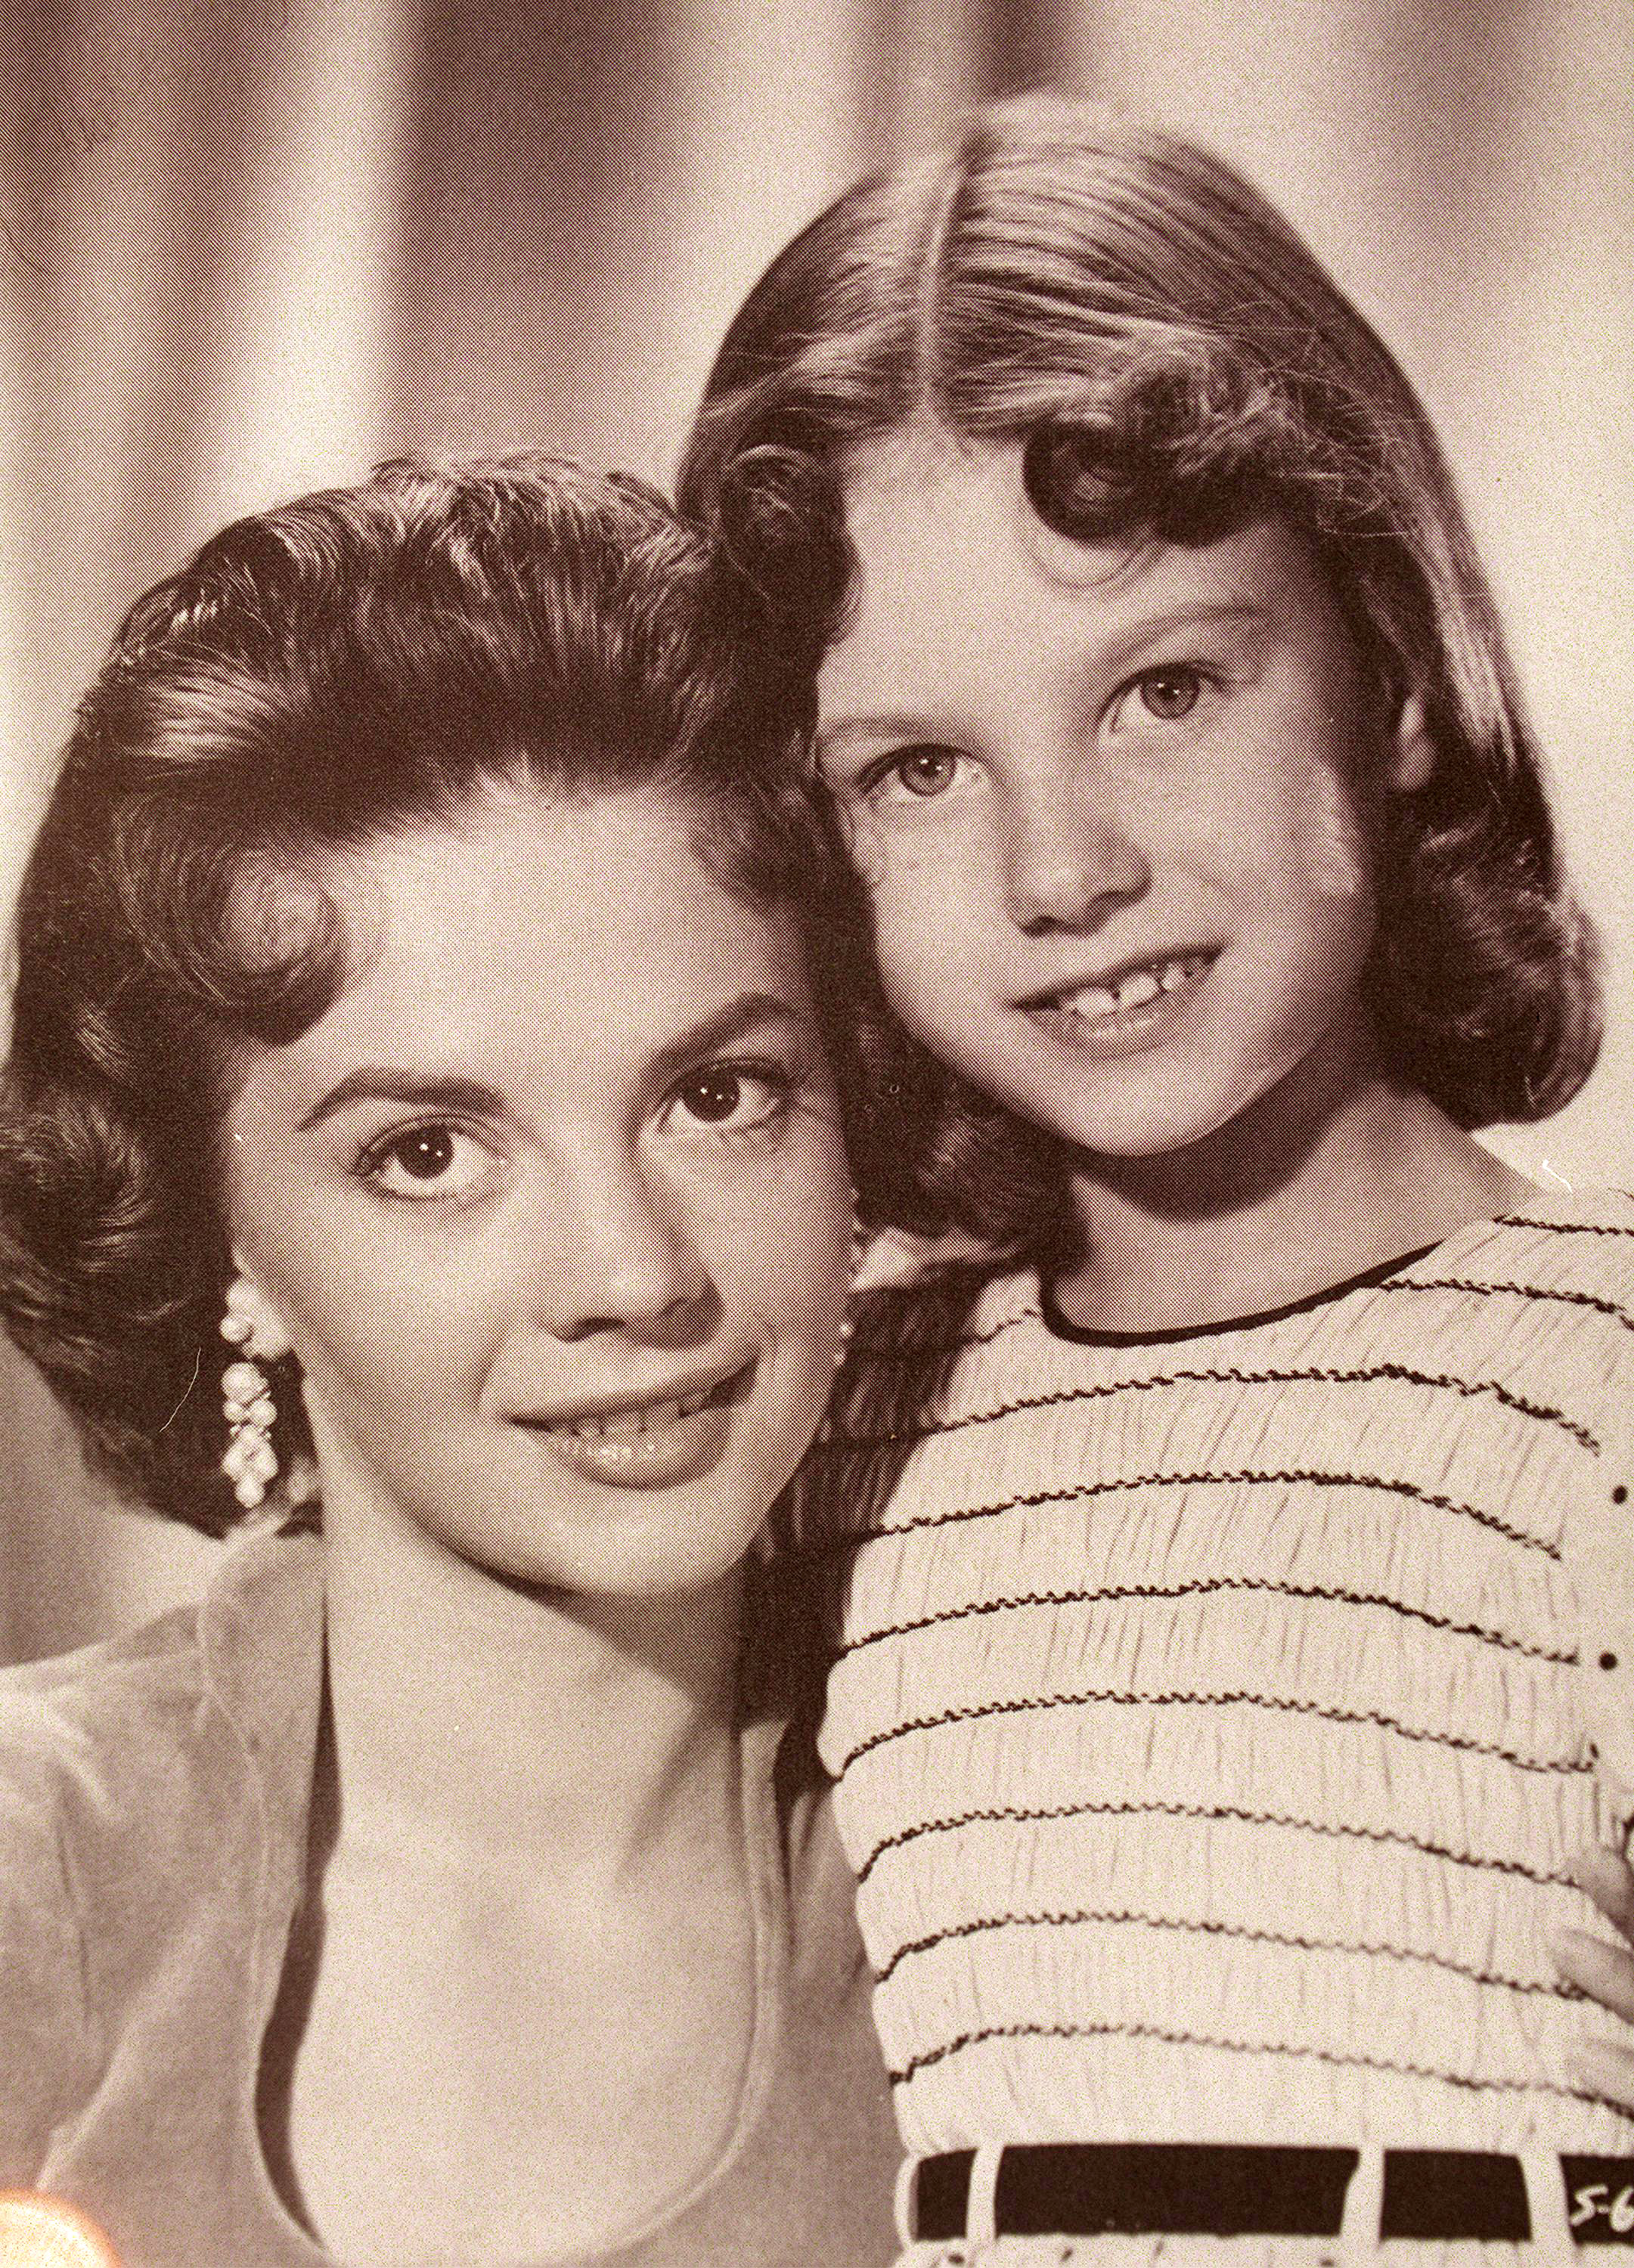 Lana Wood and Natalie Wood when Lana played Natalie as a young girl in the film "Searches" in 1956. | Source: Getty Images